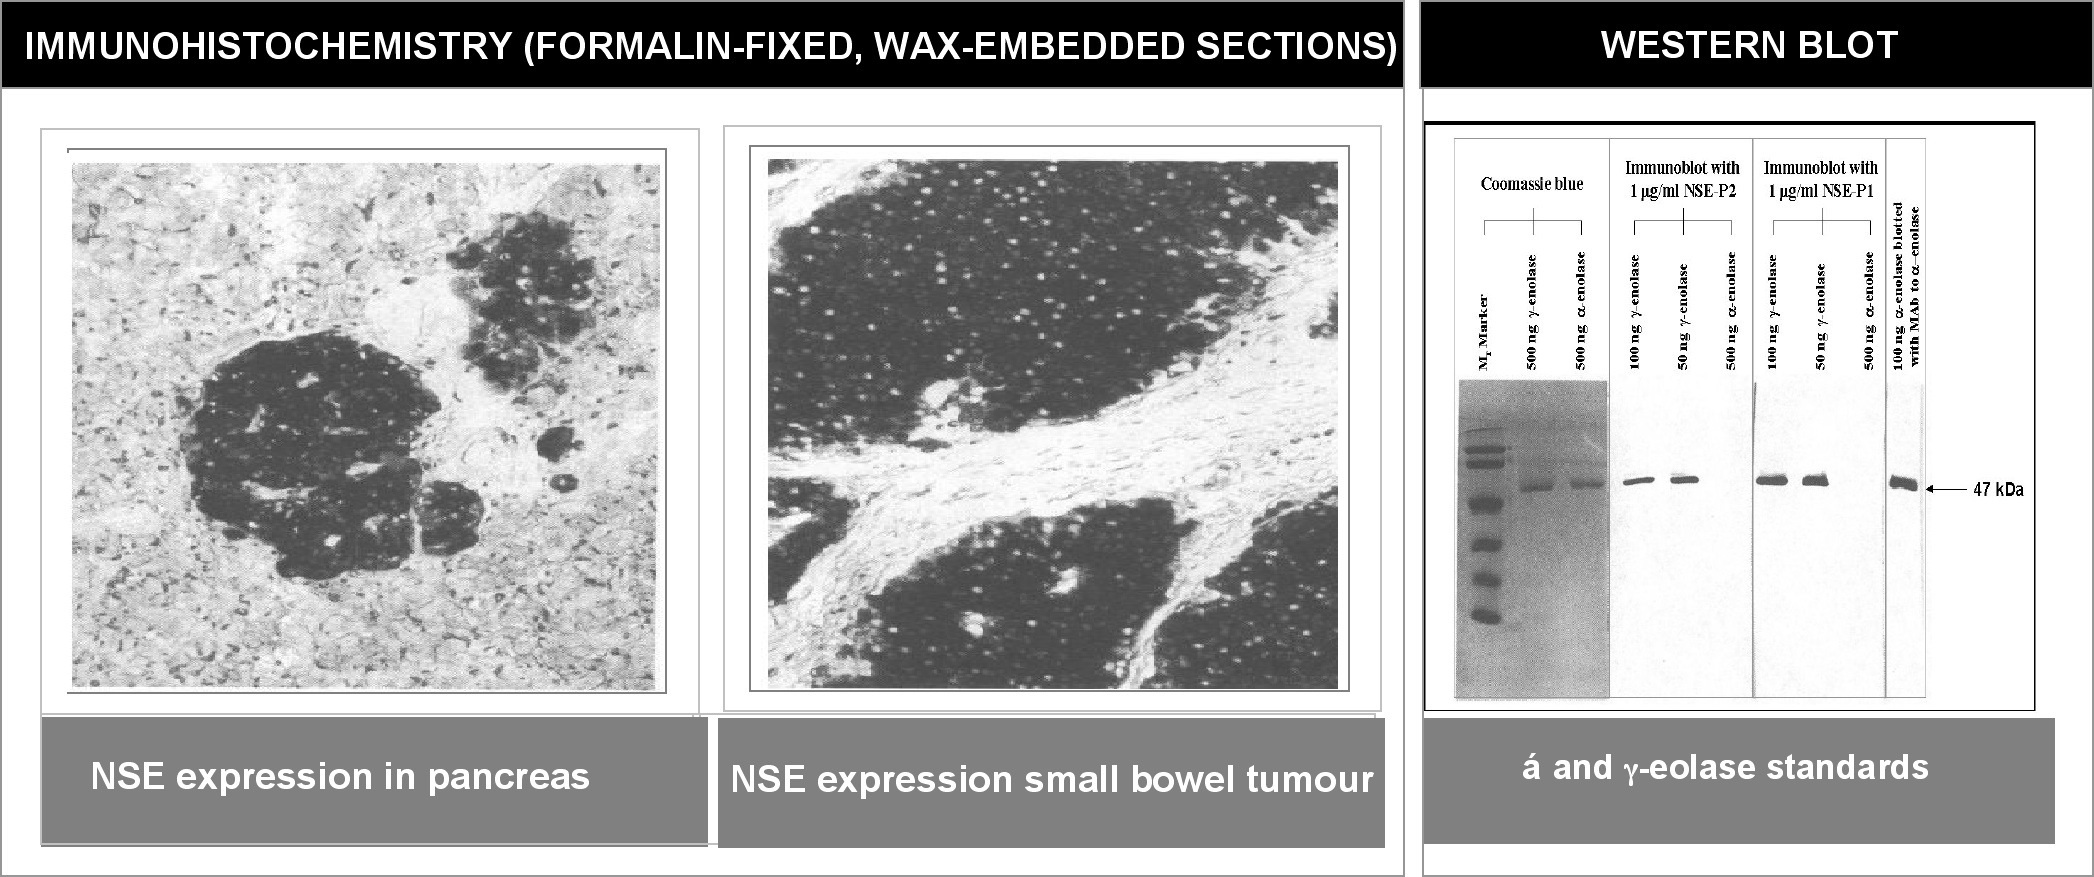 "Left and Center: Immunohistochemical staining of normal pancreas tissue (left) and small bowel tumor tissue (center) using NSE antibody (X2070M and X2071M).
Right: Western blot analysis using NSE antibodies (X2070M and X2071M) on α and γ enolase standards."